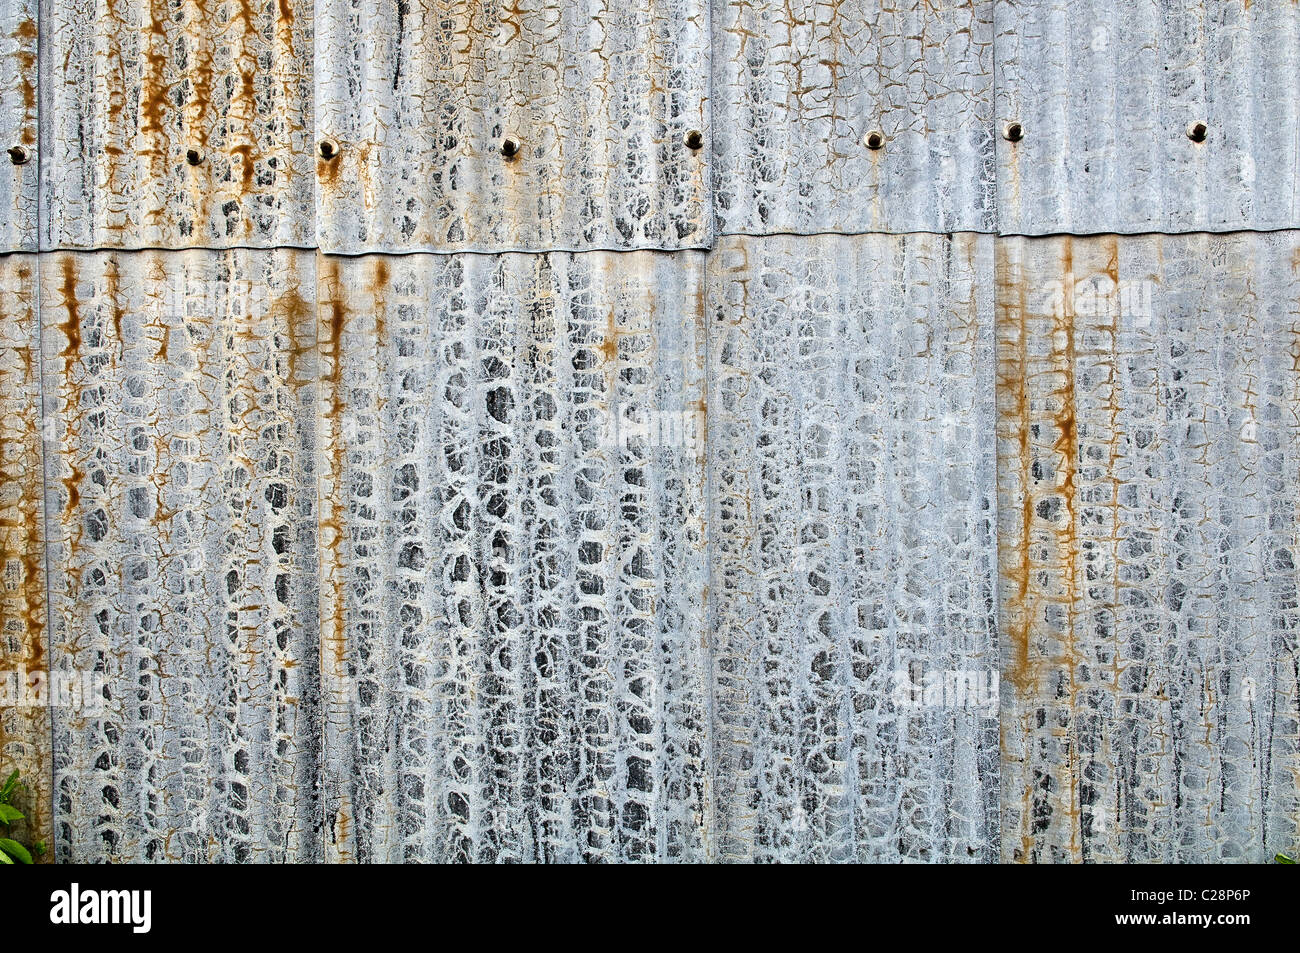 Interesting patterns on the side of a corrugated steel barn Stock Photo